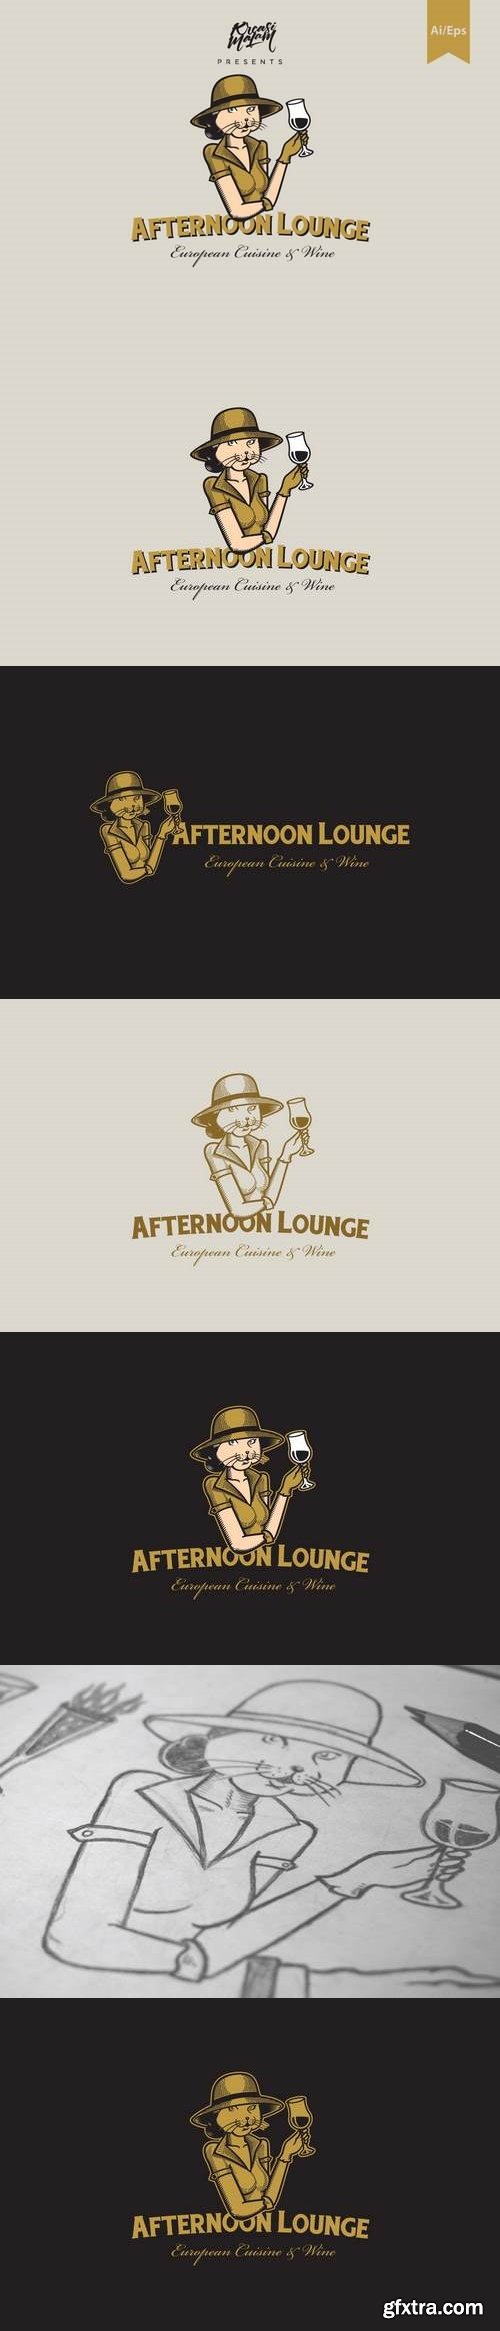 Afternoon Lounge Logo Template